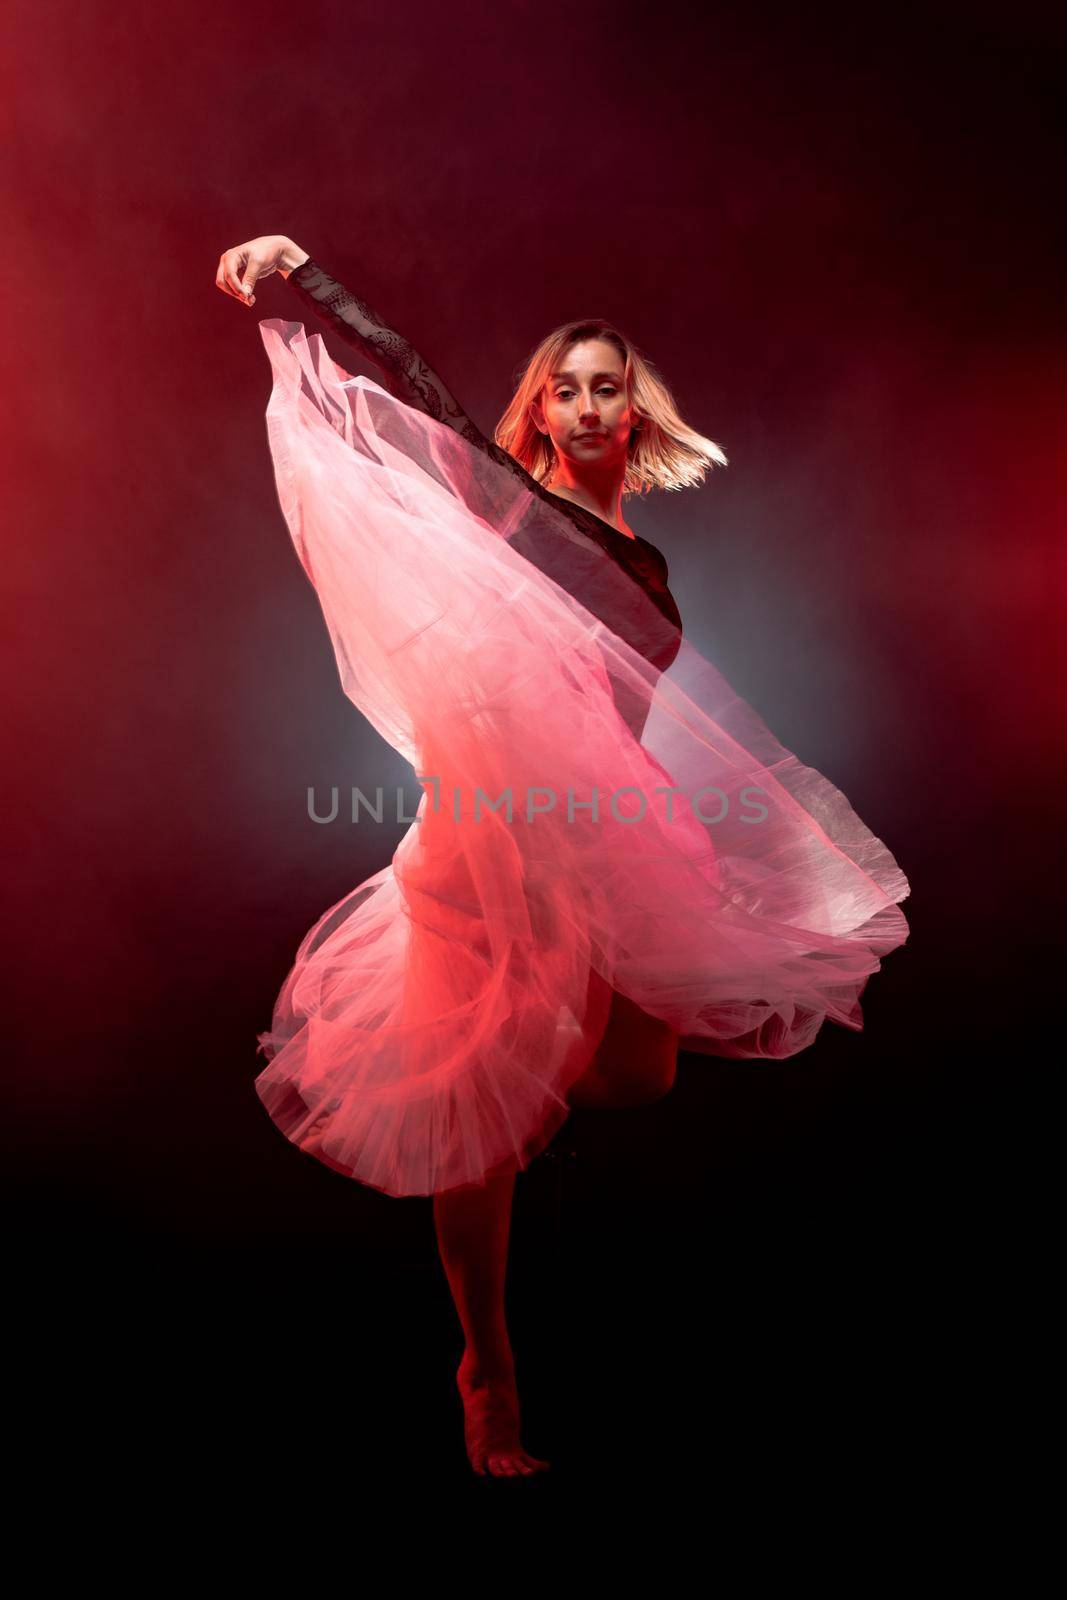 ballerina with a white dress and black top posing on red smoke background by kokimk